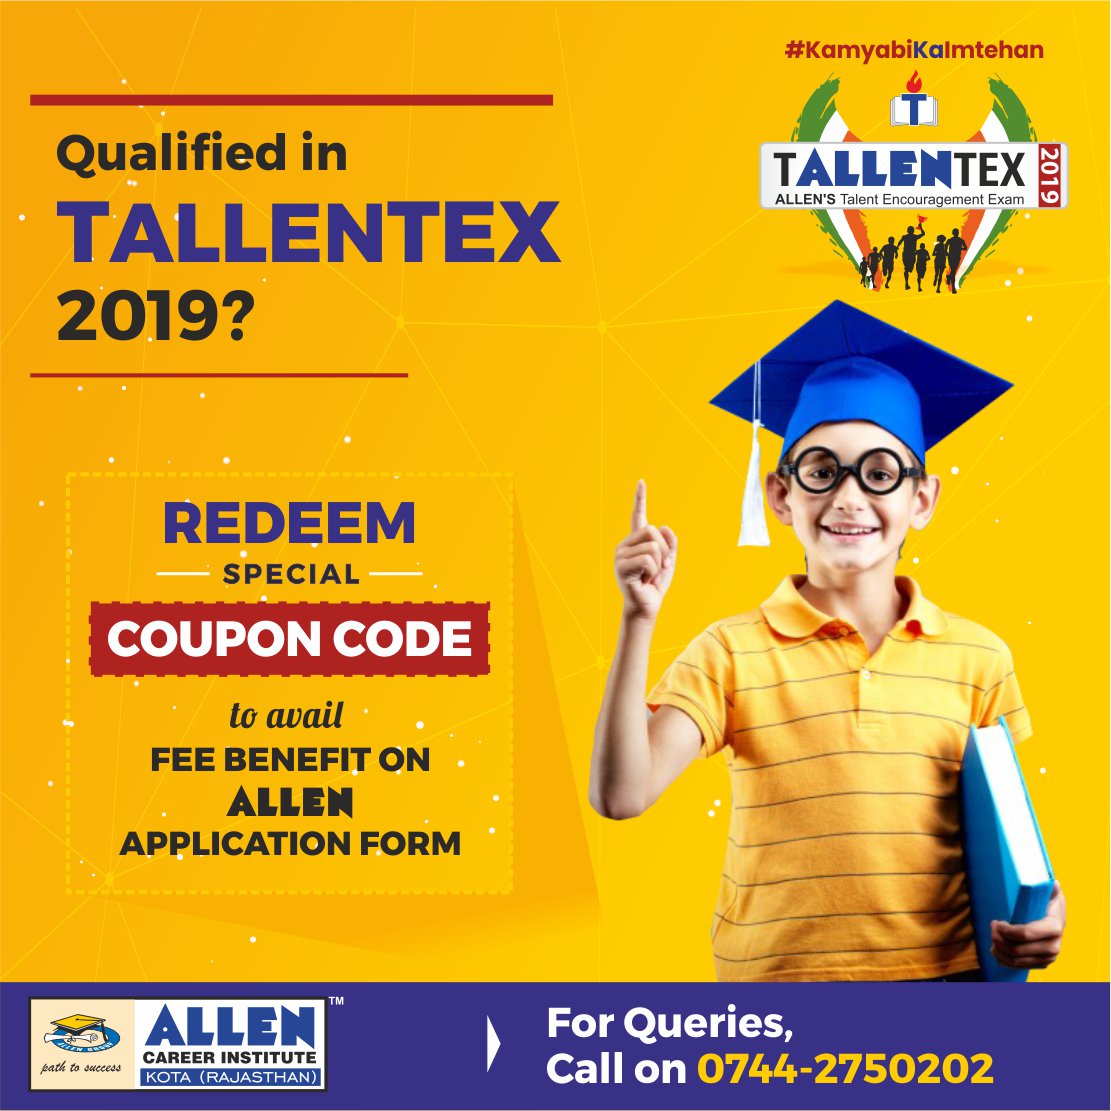 #ThingstoRemember #BenefitsofTallentex
Students who qualified in #TALLENTEX2019 received a #UNIQUECODE to get ALLEN #ApplicationForm special fee benefit of ₹200 (Online) or ₹300 (Offline) for Session 2019-20
To avail yours, follow: goo.gl/2bm6zG
#Tallentex #ALLENKota